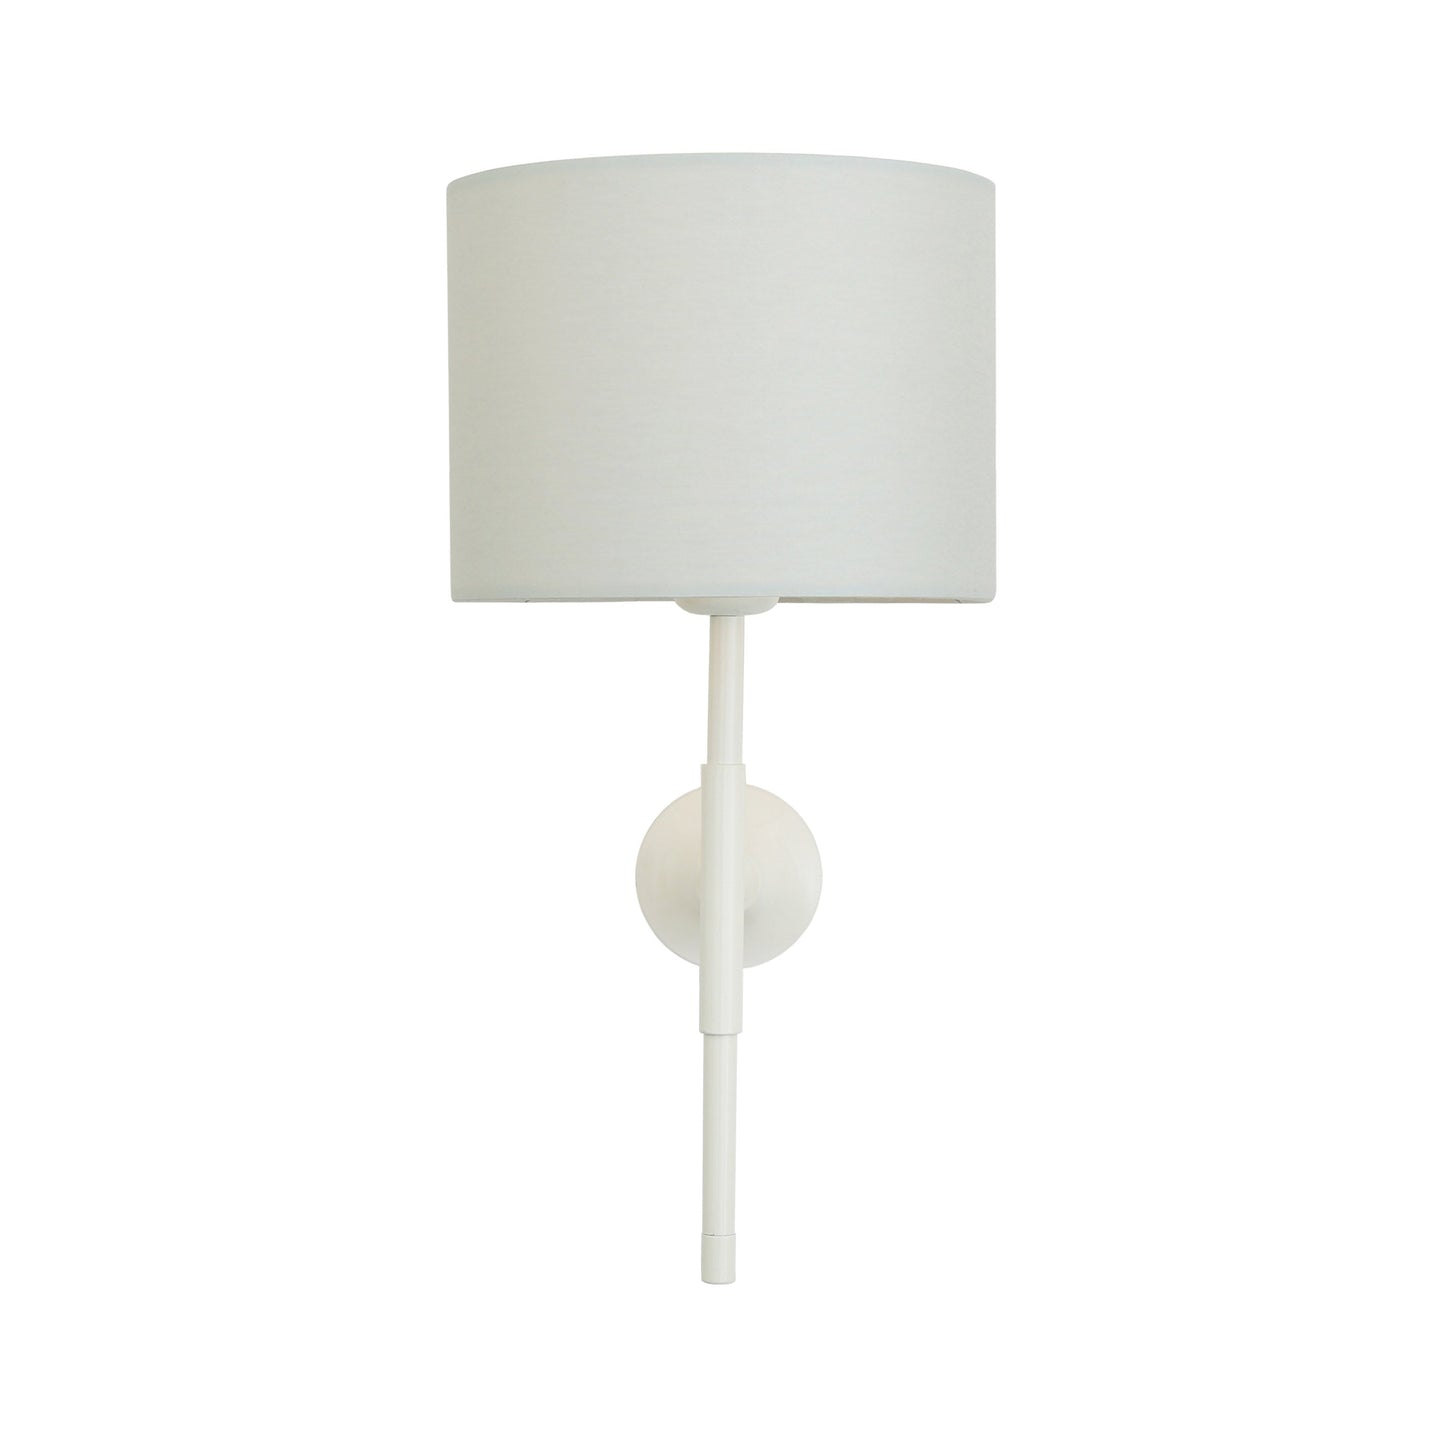 Tenby Modern Brass Wall Light with Empire Fabric Shade Product Shot